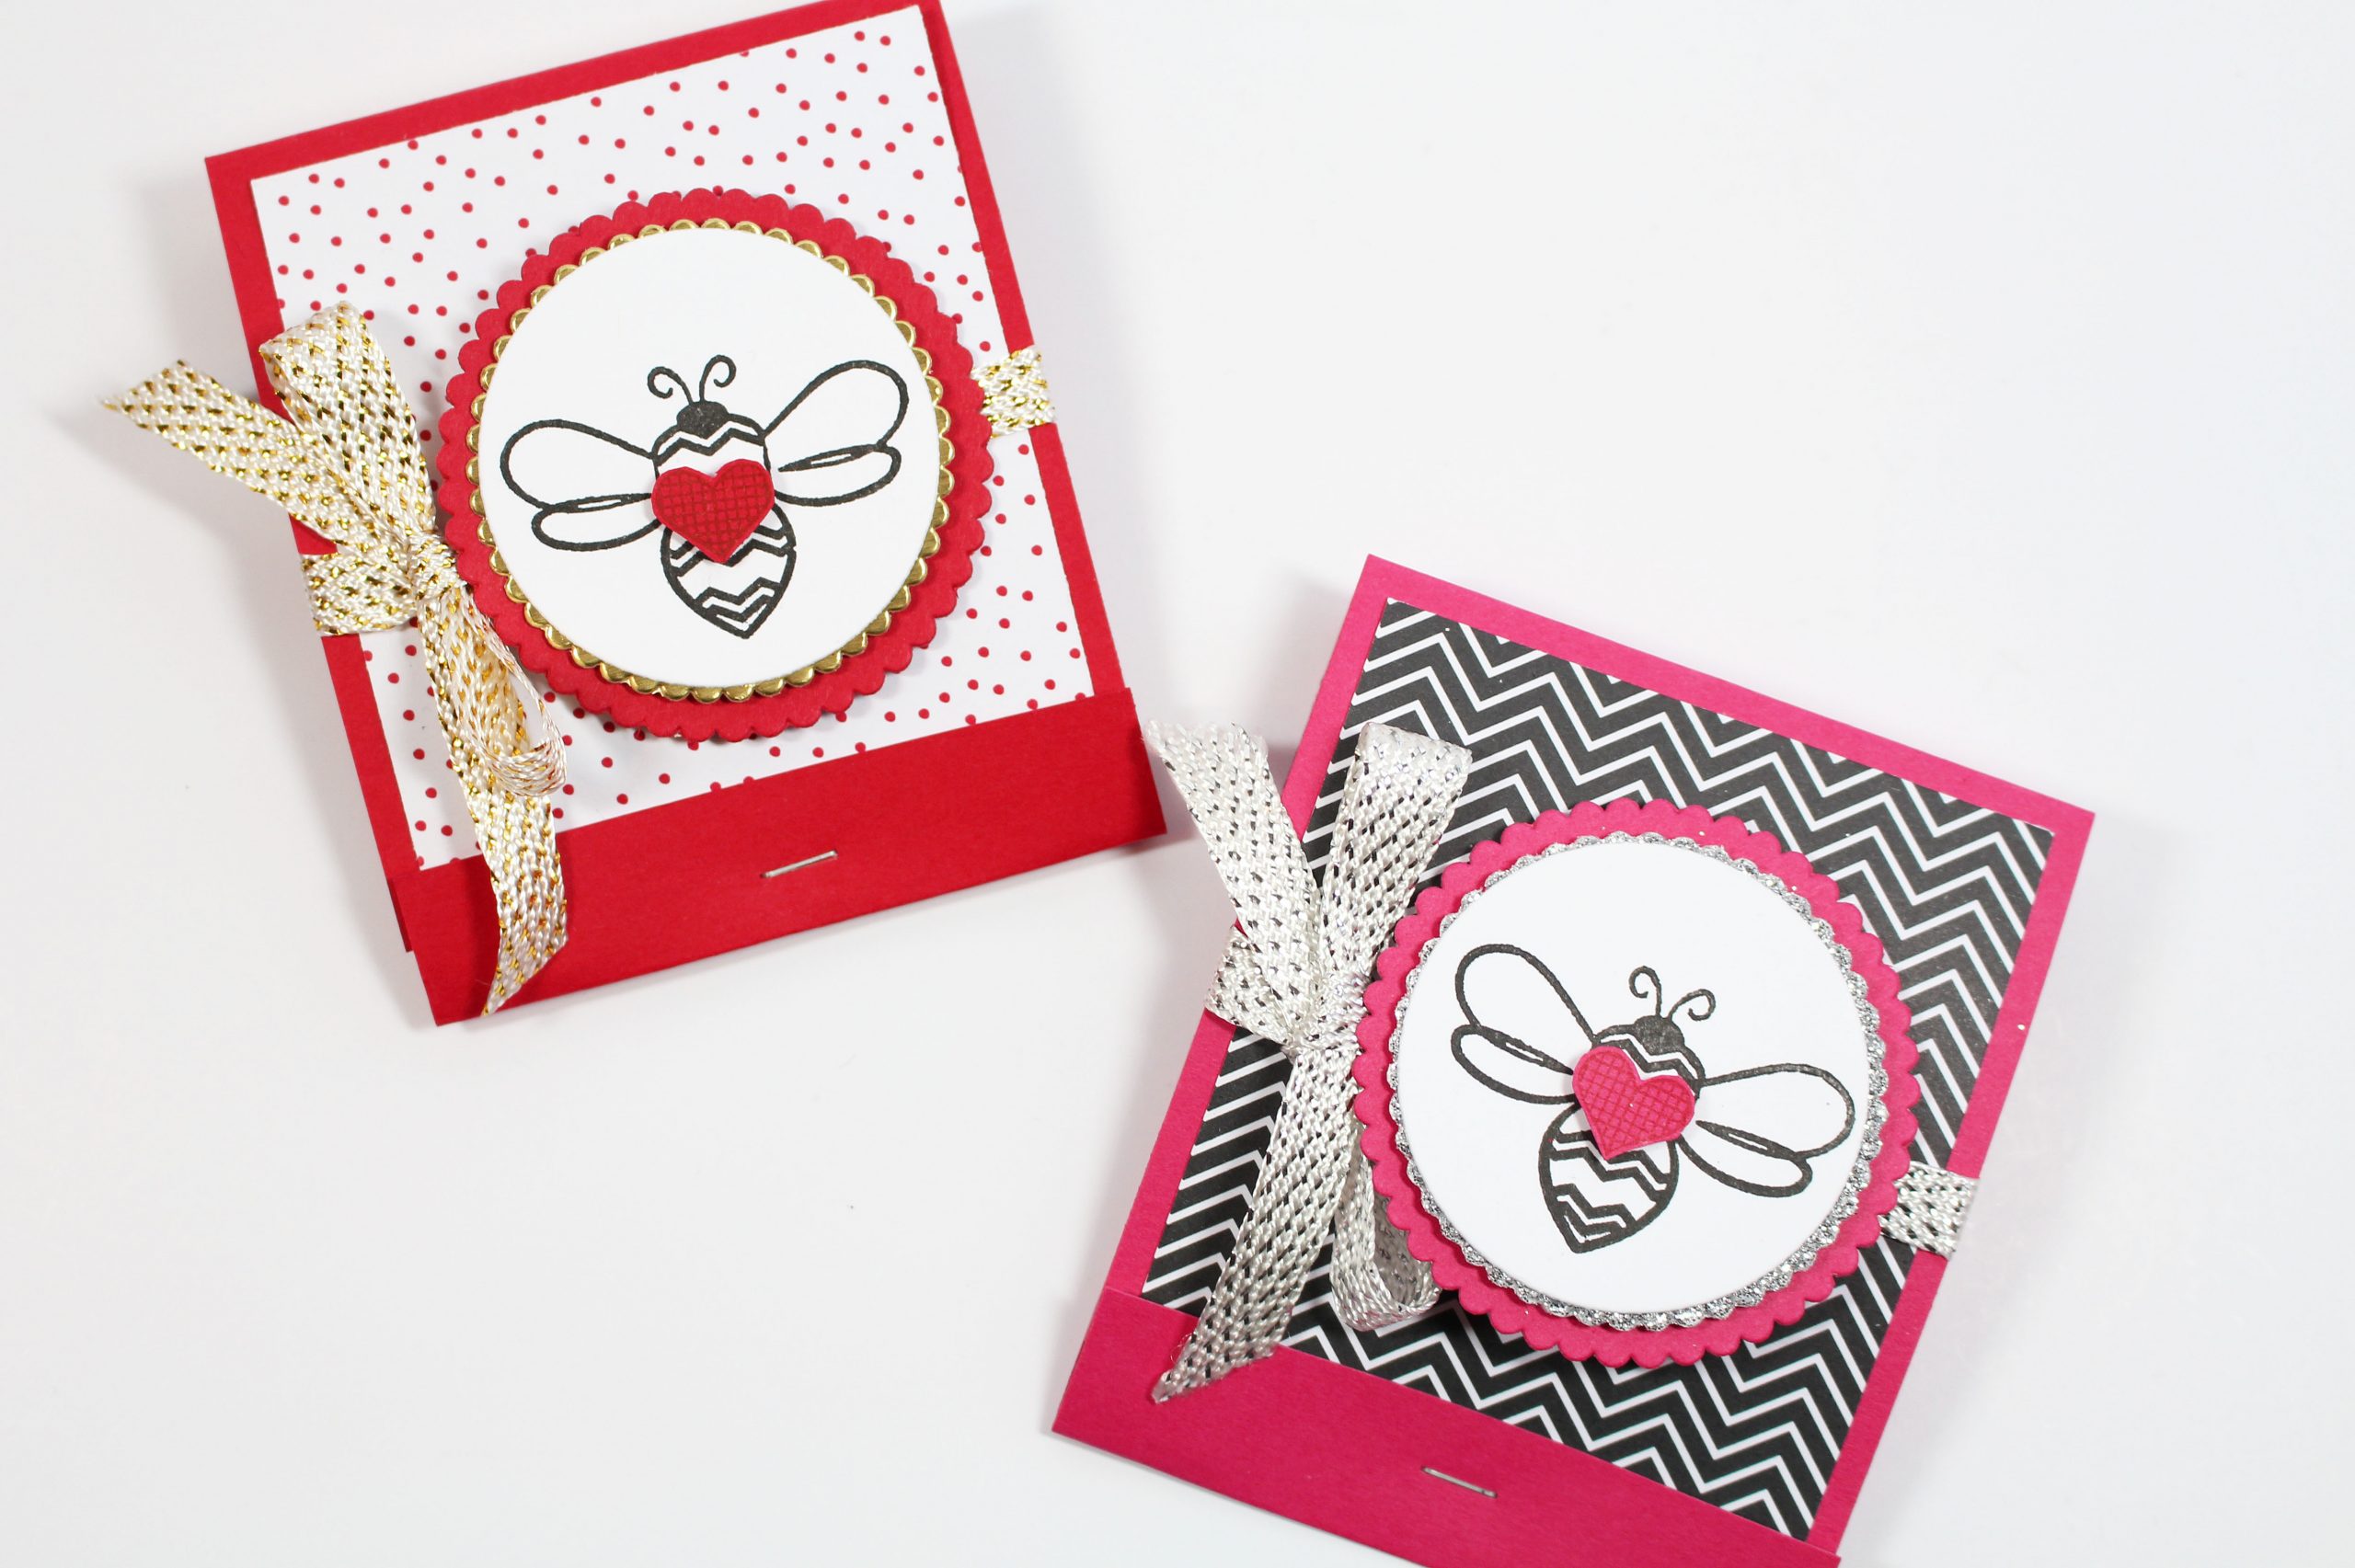 Stampin’ Up! Pun Intended goes Valentine’s Ghirardelli Matchbook Treat